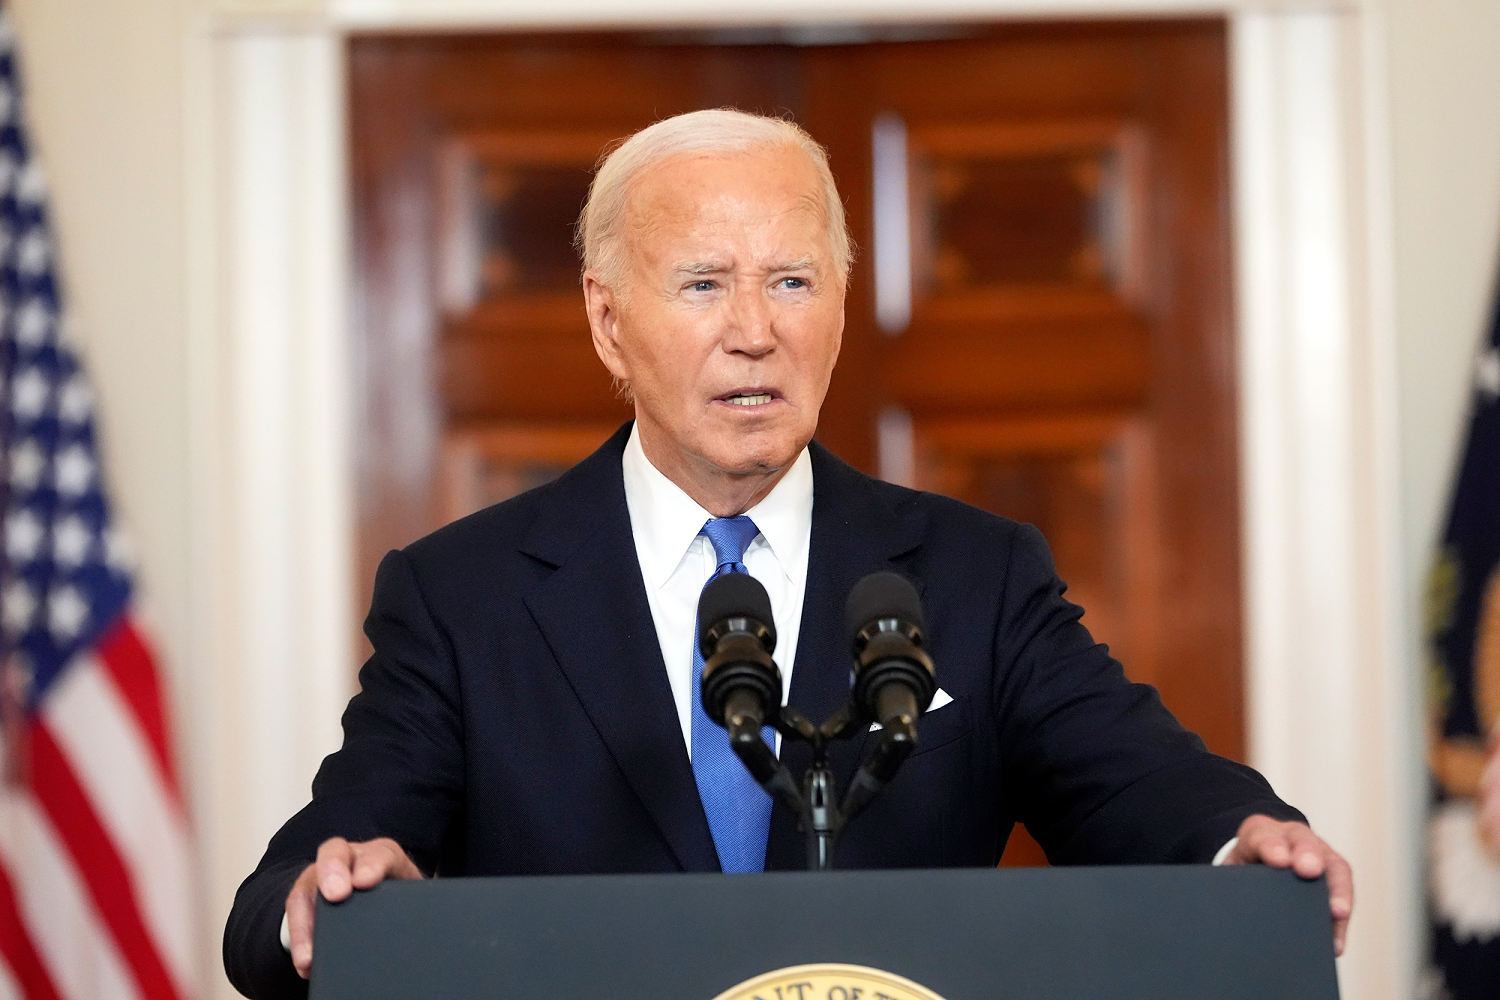 Biden privately remains torn between defiance and acceptance amid calls to step aside